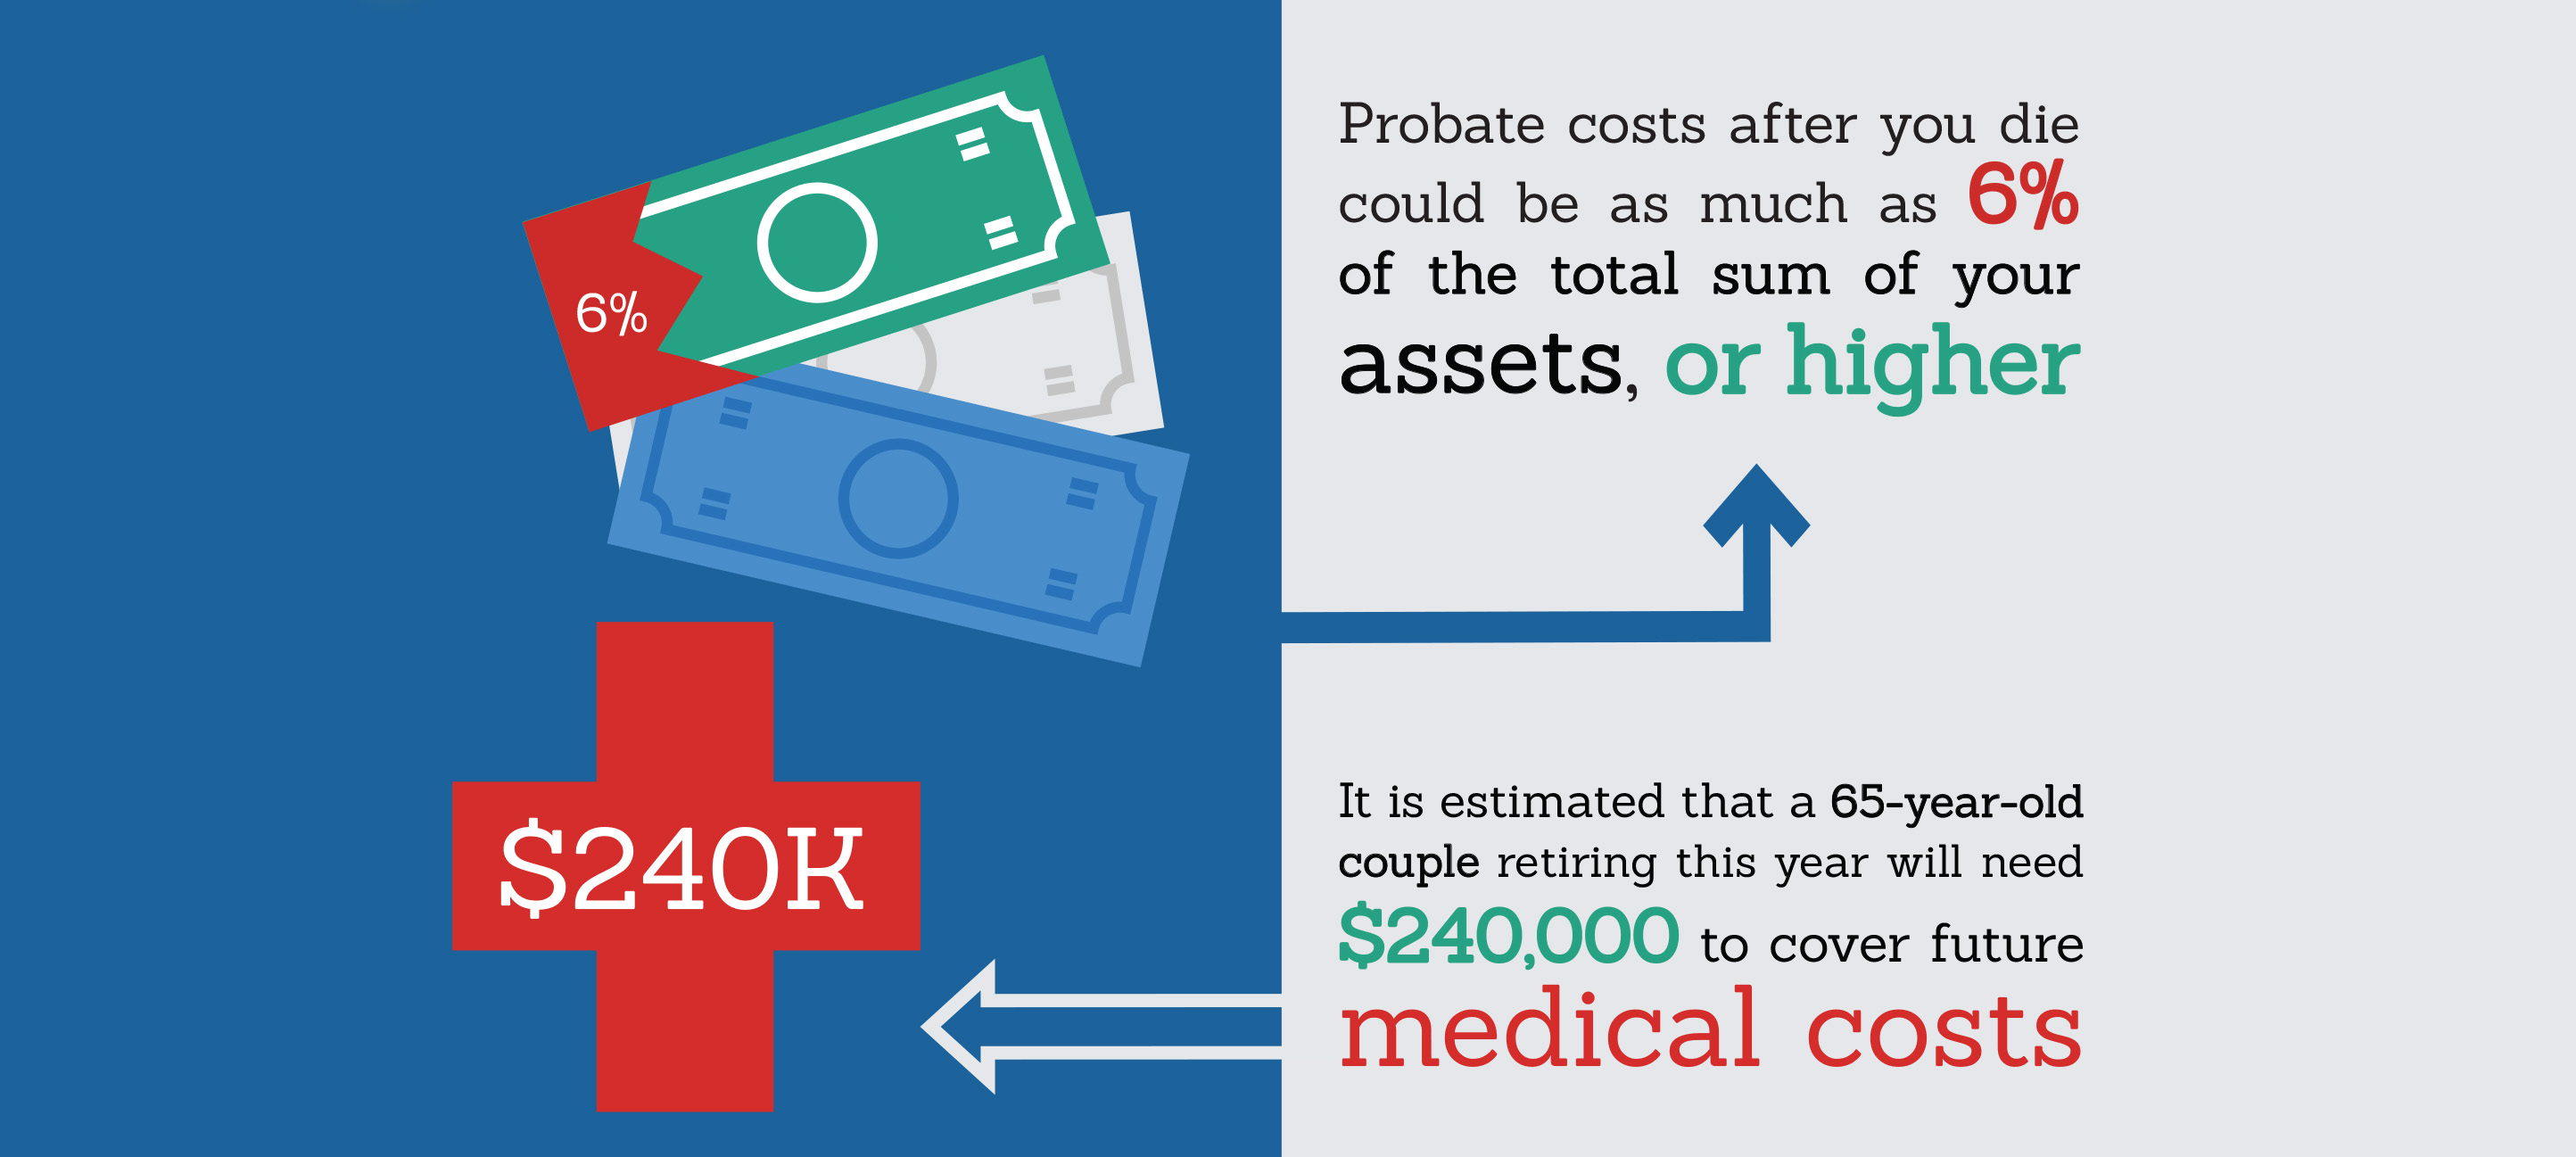 infographic about probate costs